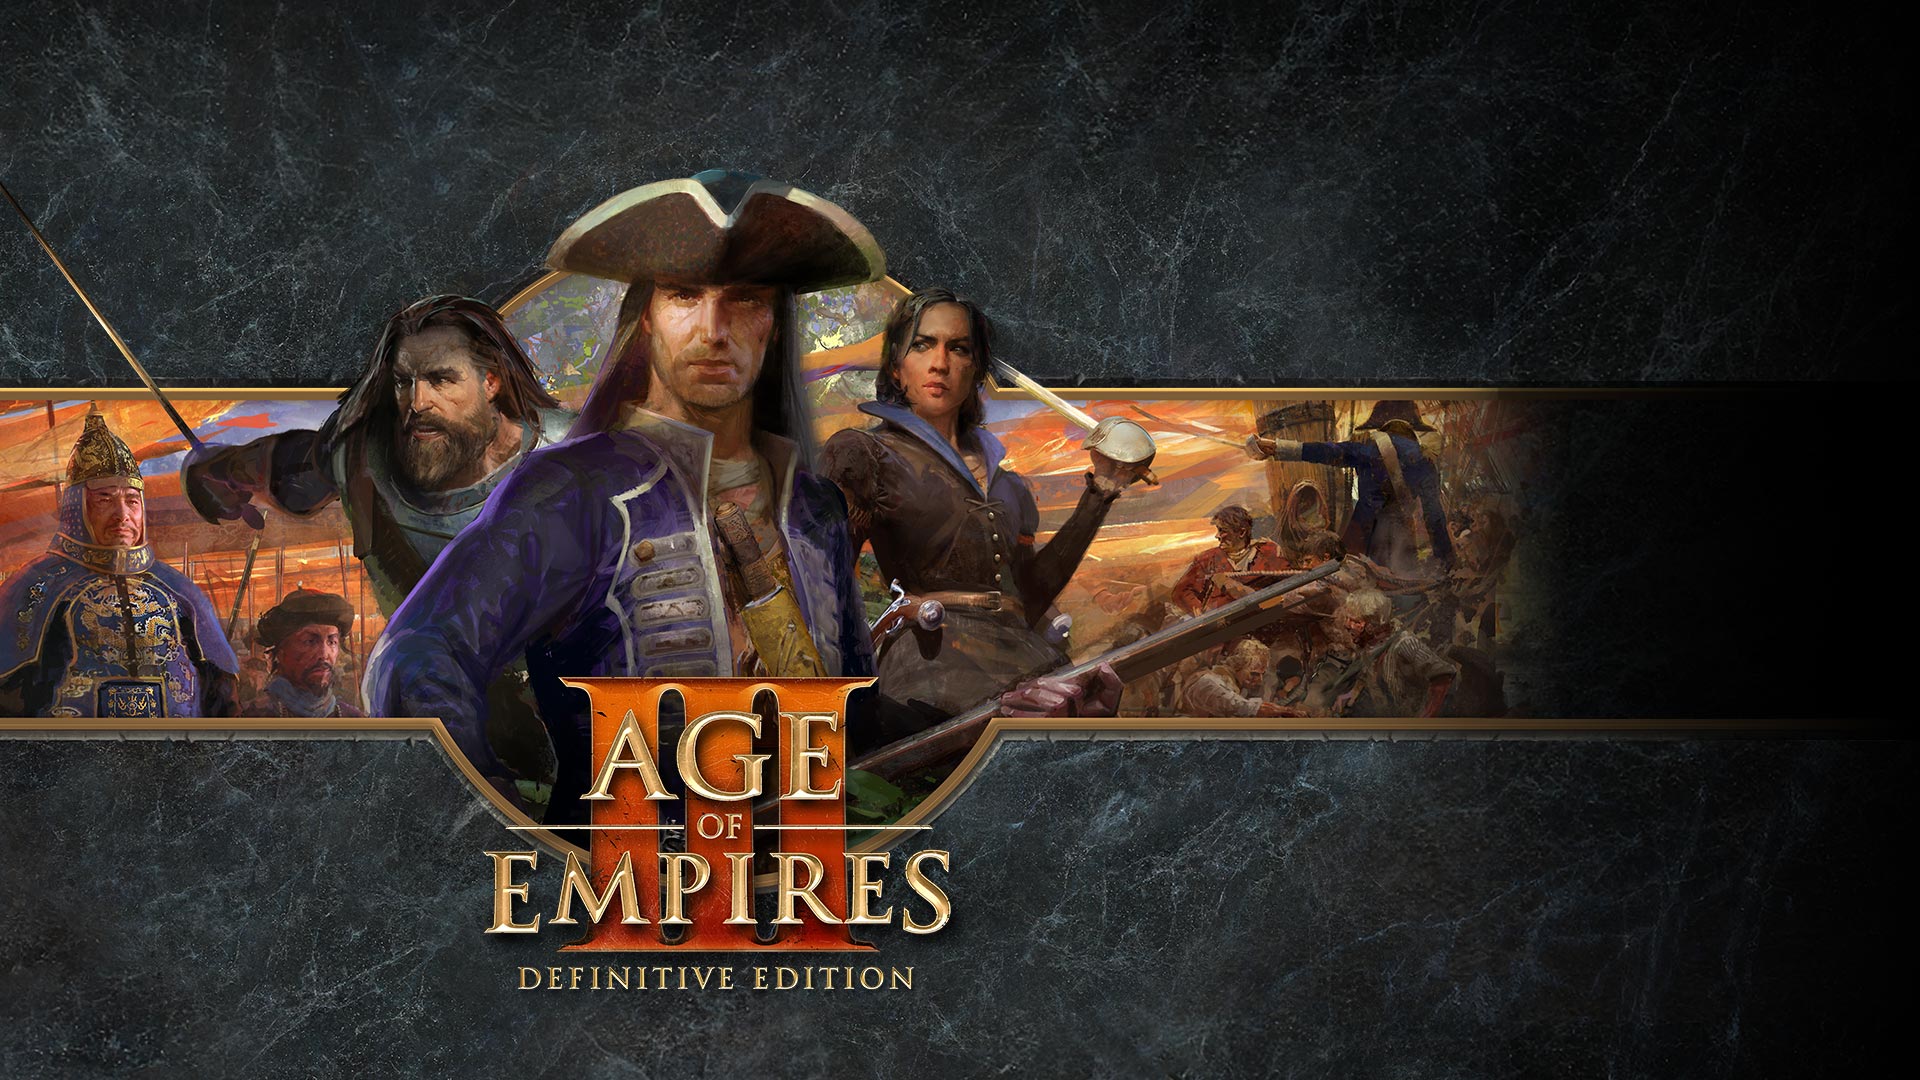 Age of Empires III: Definitive Edition, des personnages prennent la pose